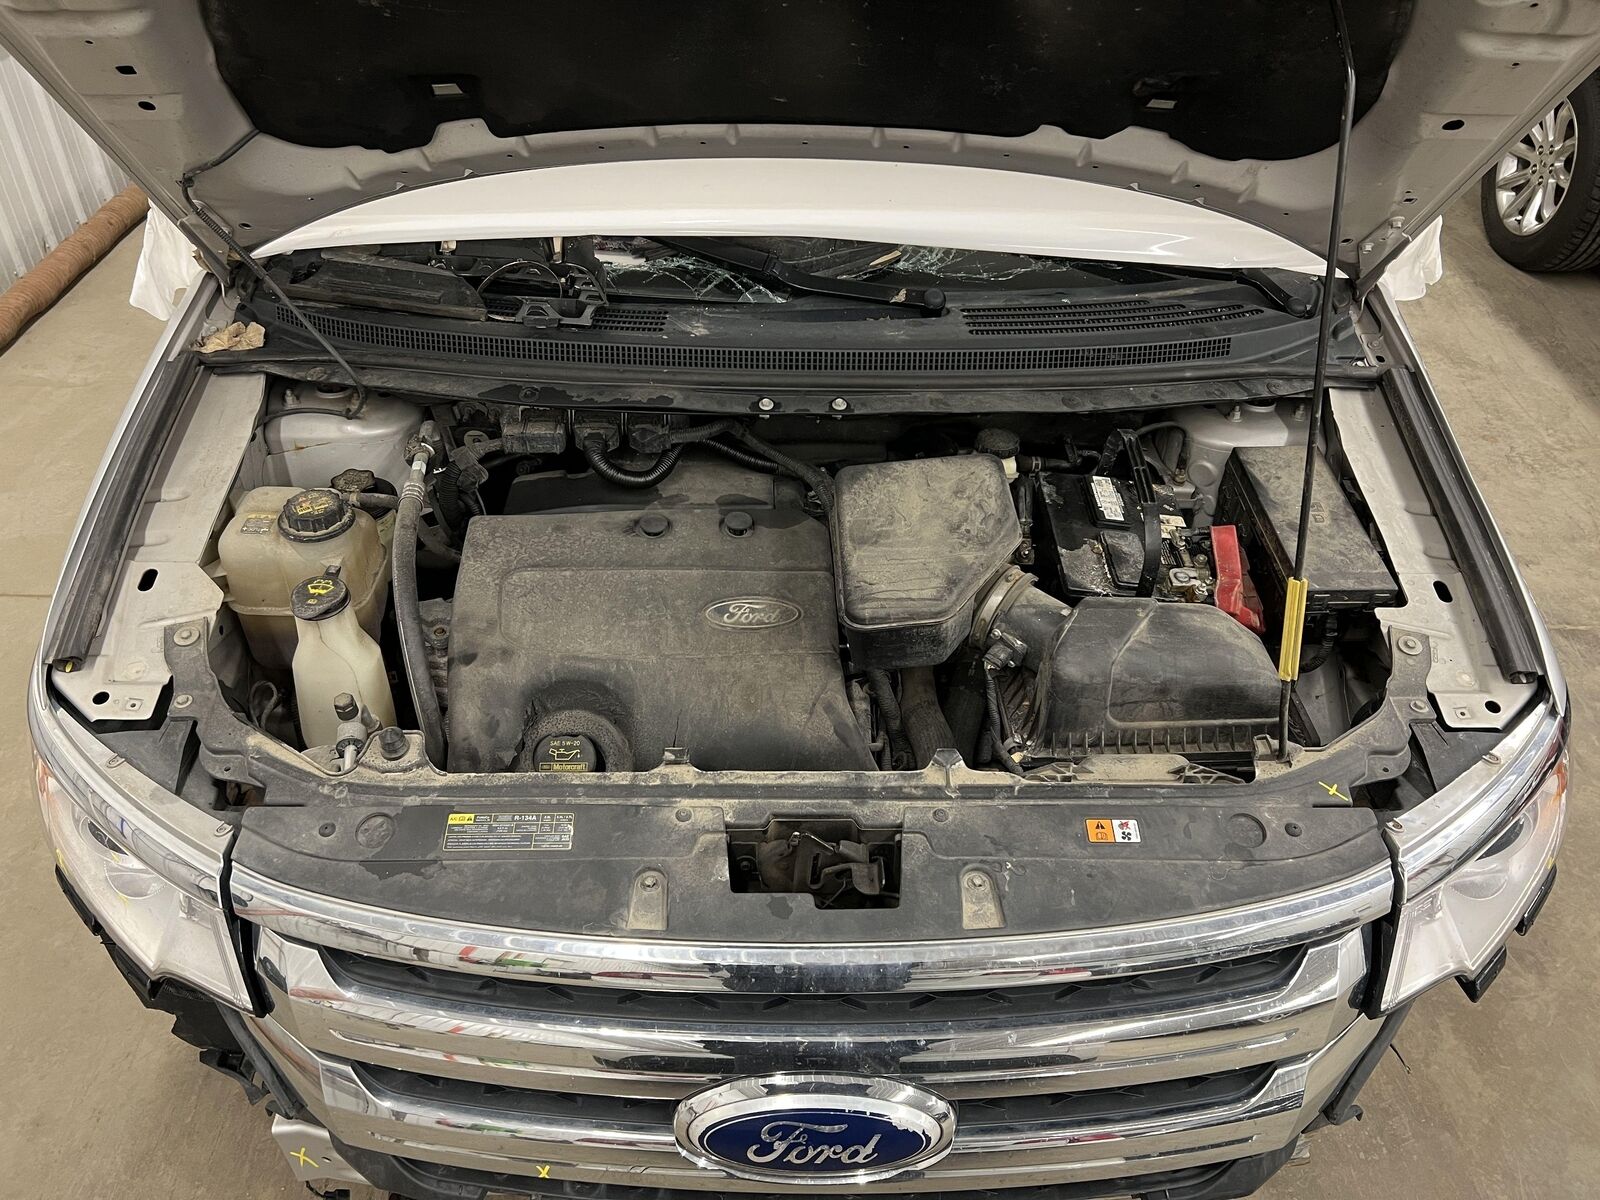 2013 FORD EDGE ENGINE MOTOR ASSEMBLY 3.5 NO CORE CHARGE 153,118 MILES | eBay